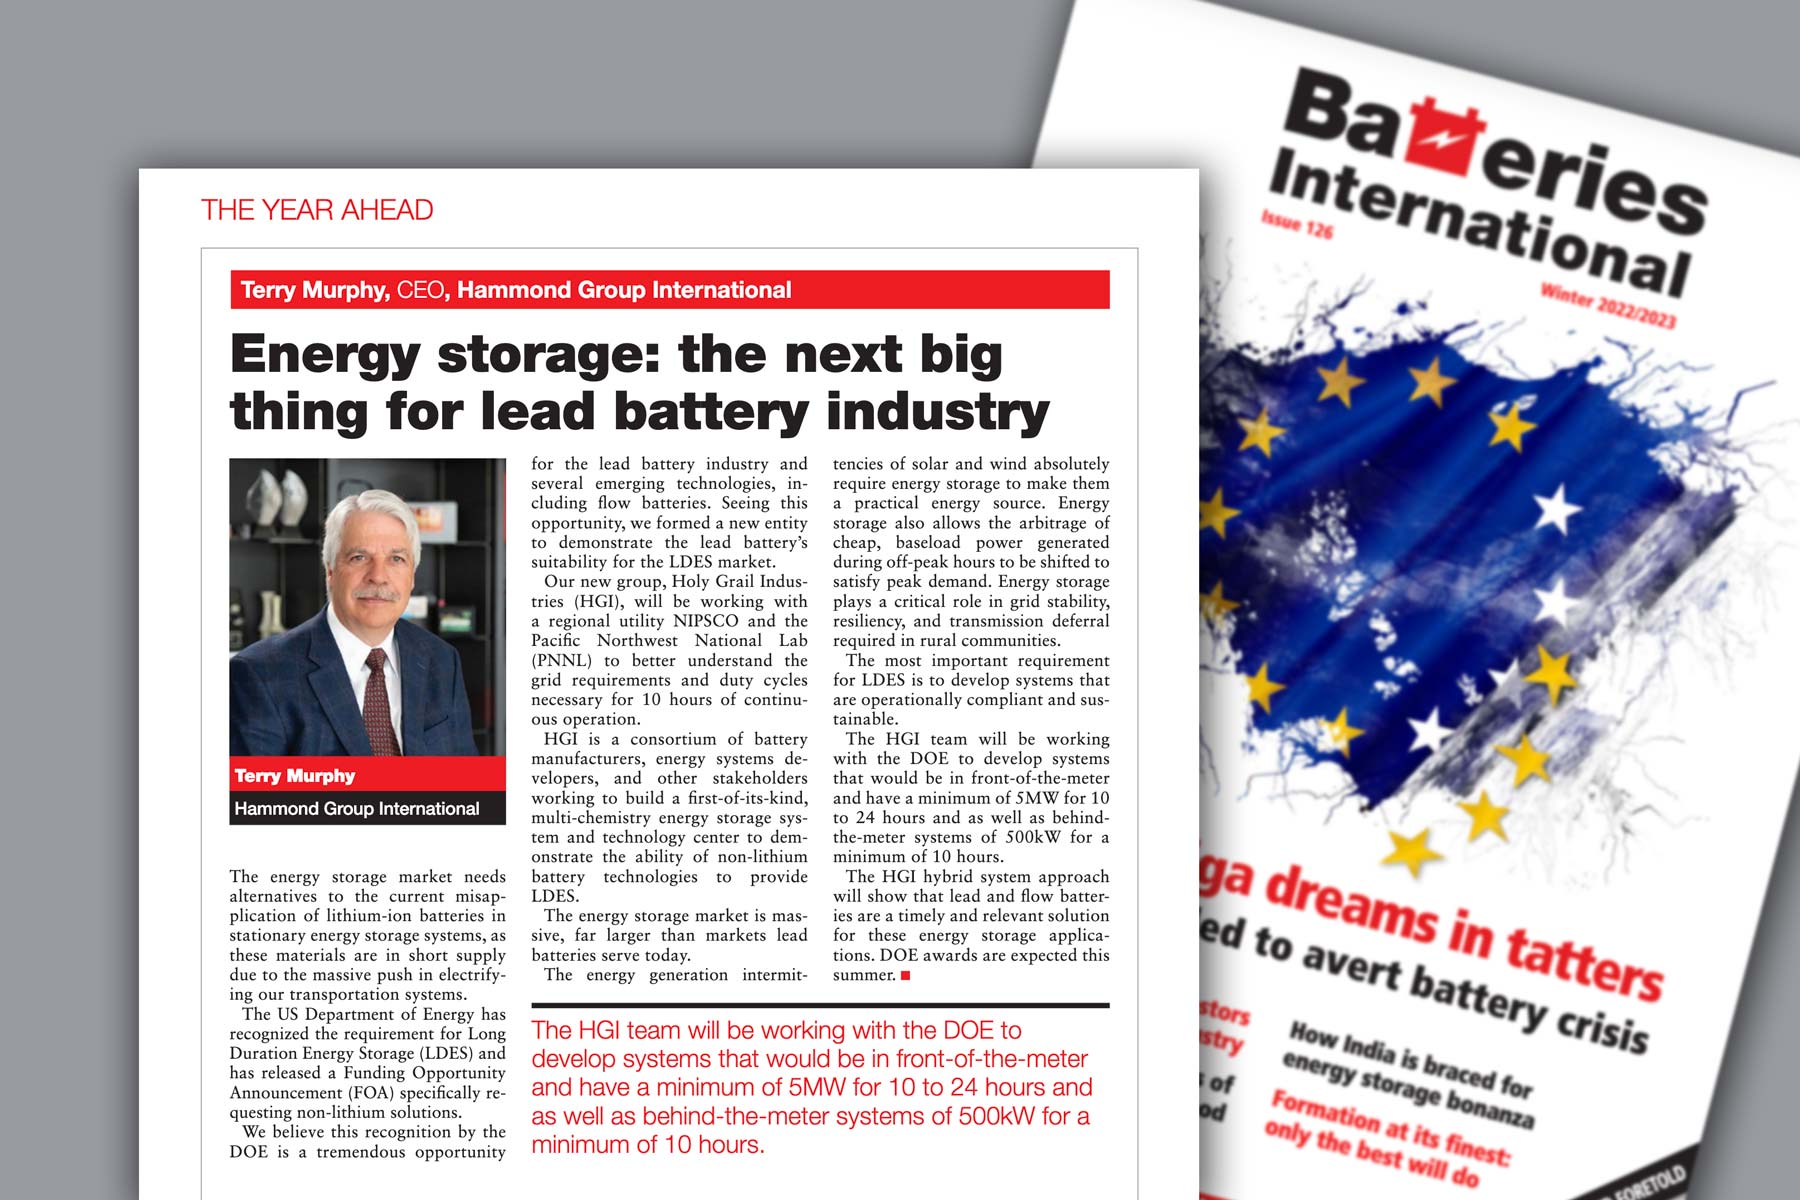 Page from Batteries International featuring commentary by Terry Murphy, CEO of Hammond Group.